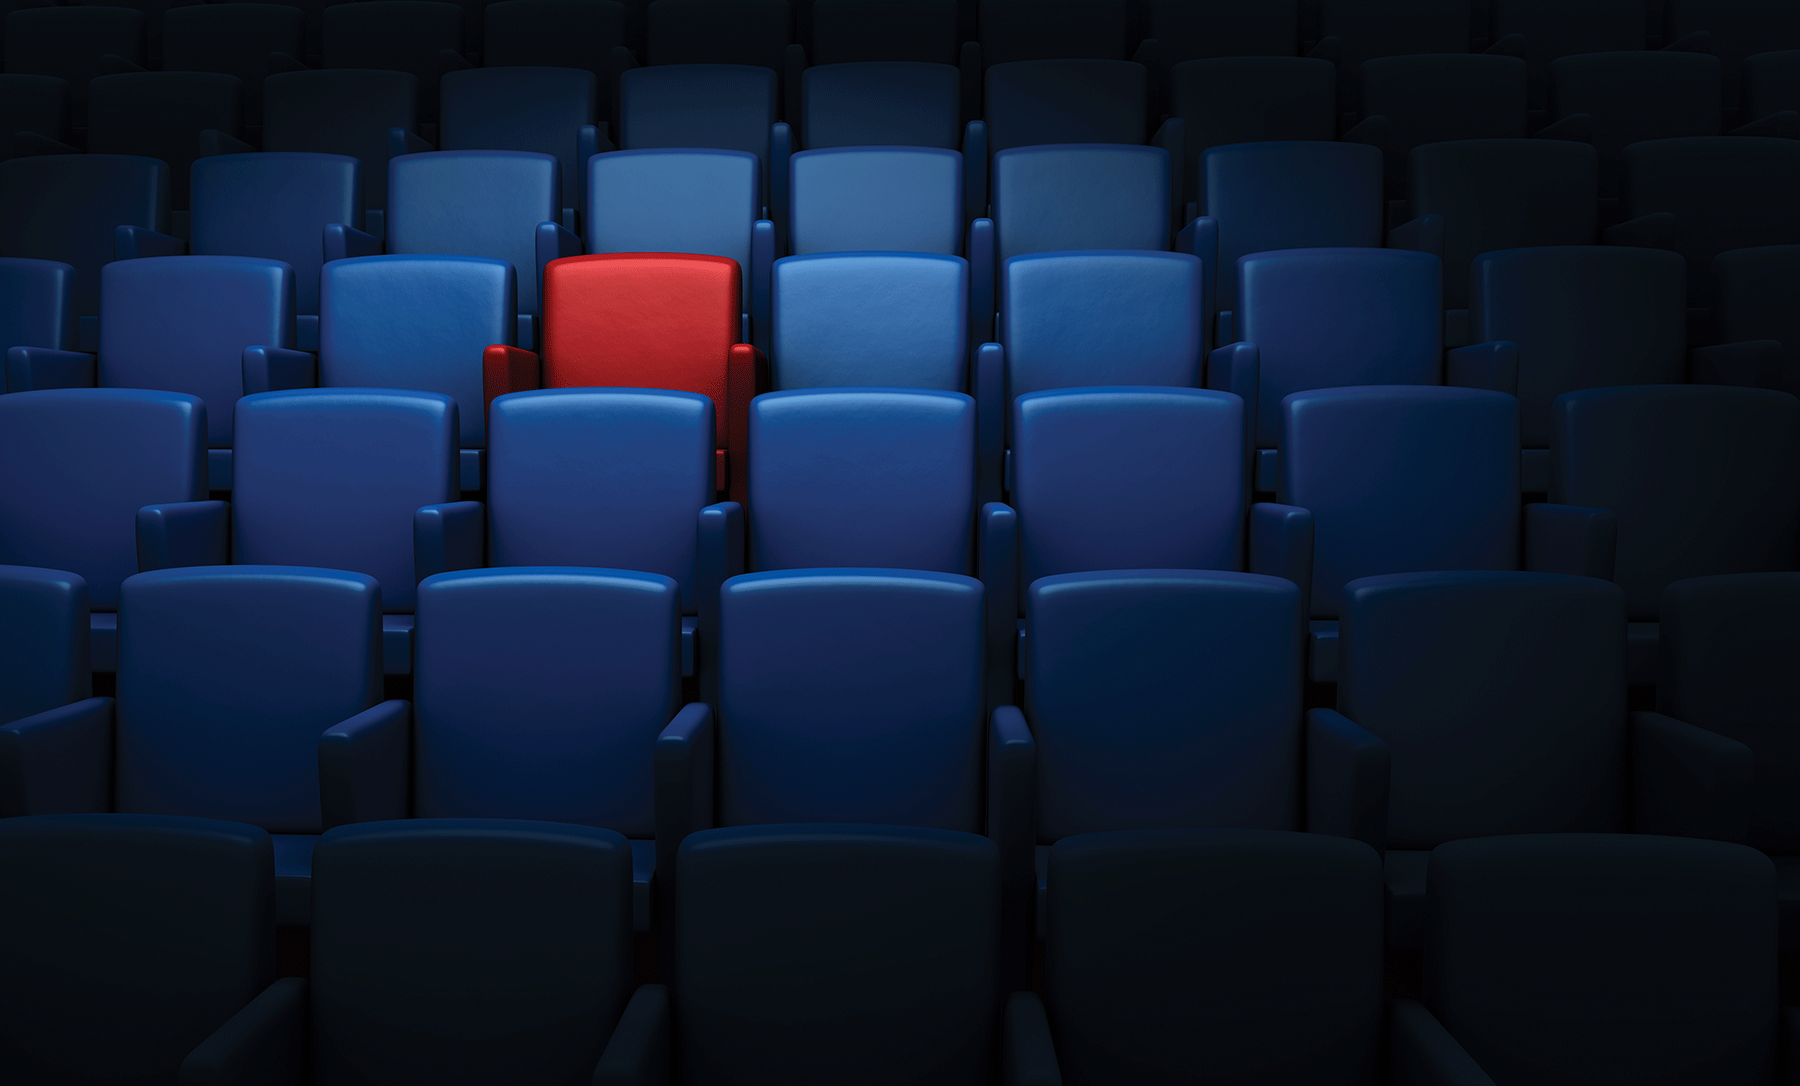 A movie theatre full of blue seat with one red seat standing out on the top left corner